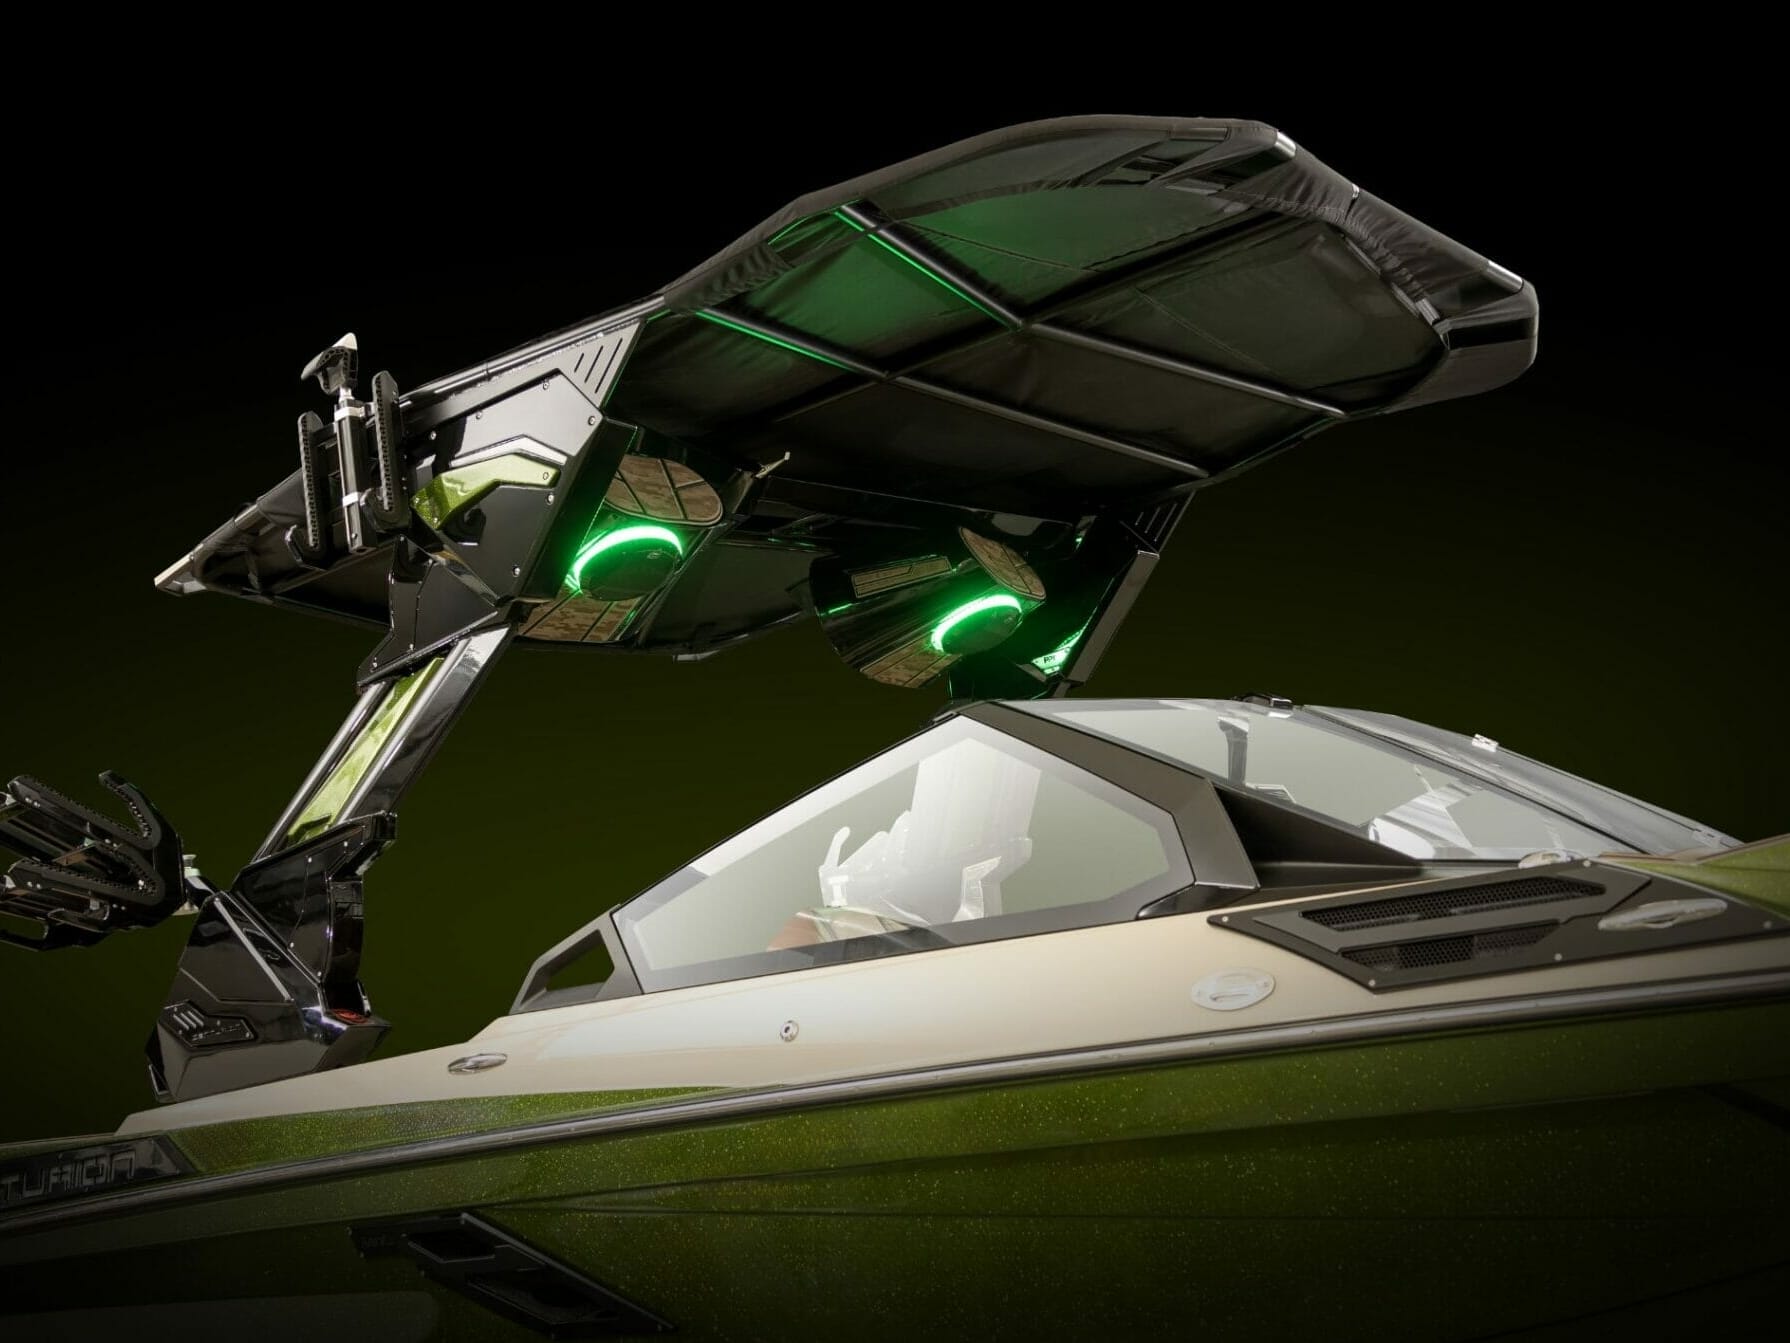 A wakesurf boat with lights on top of it.